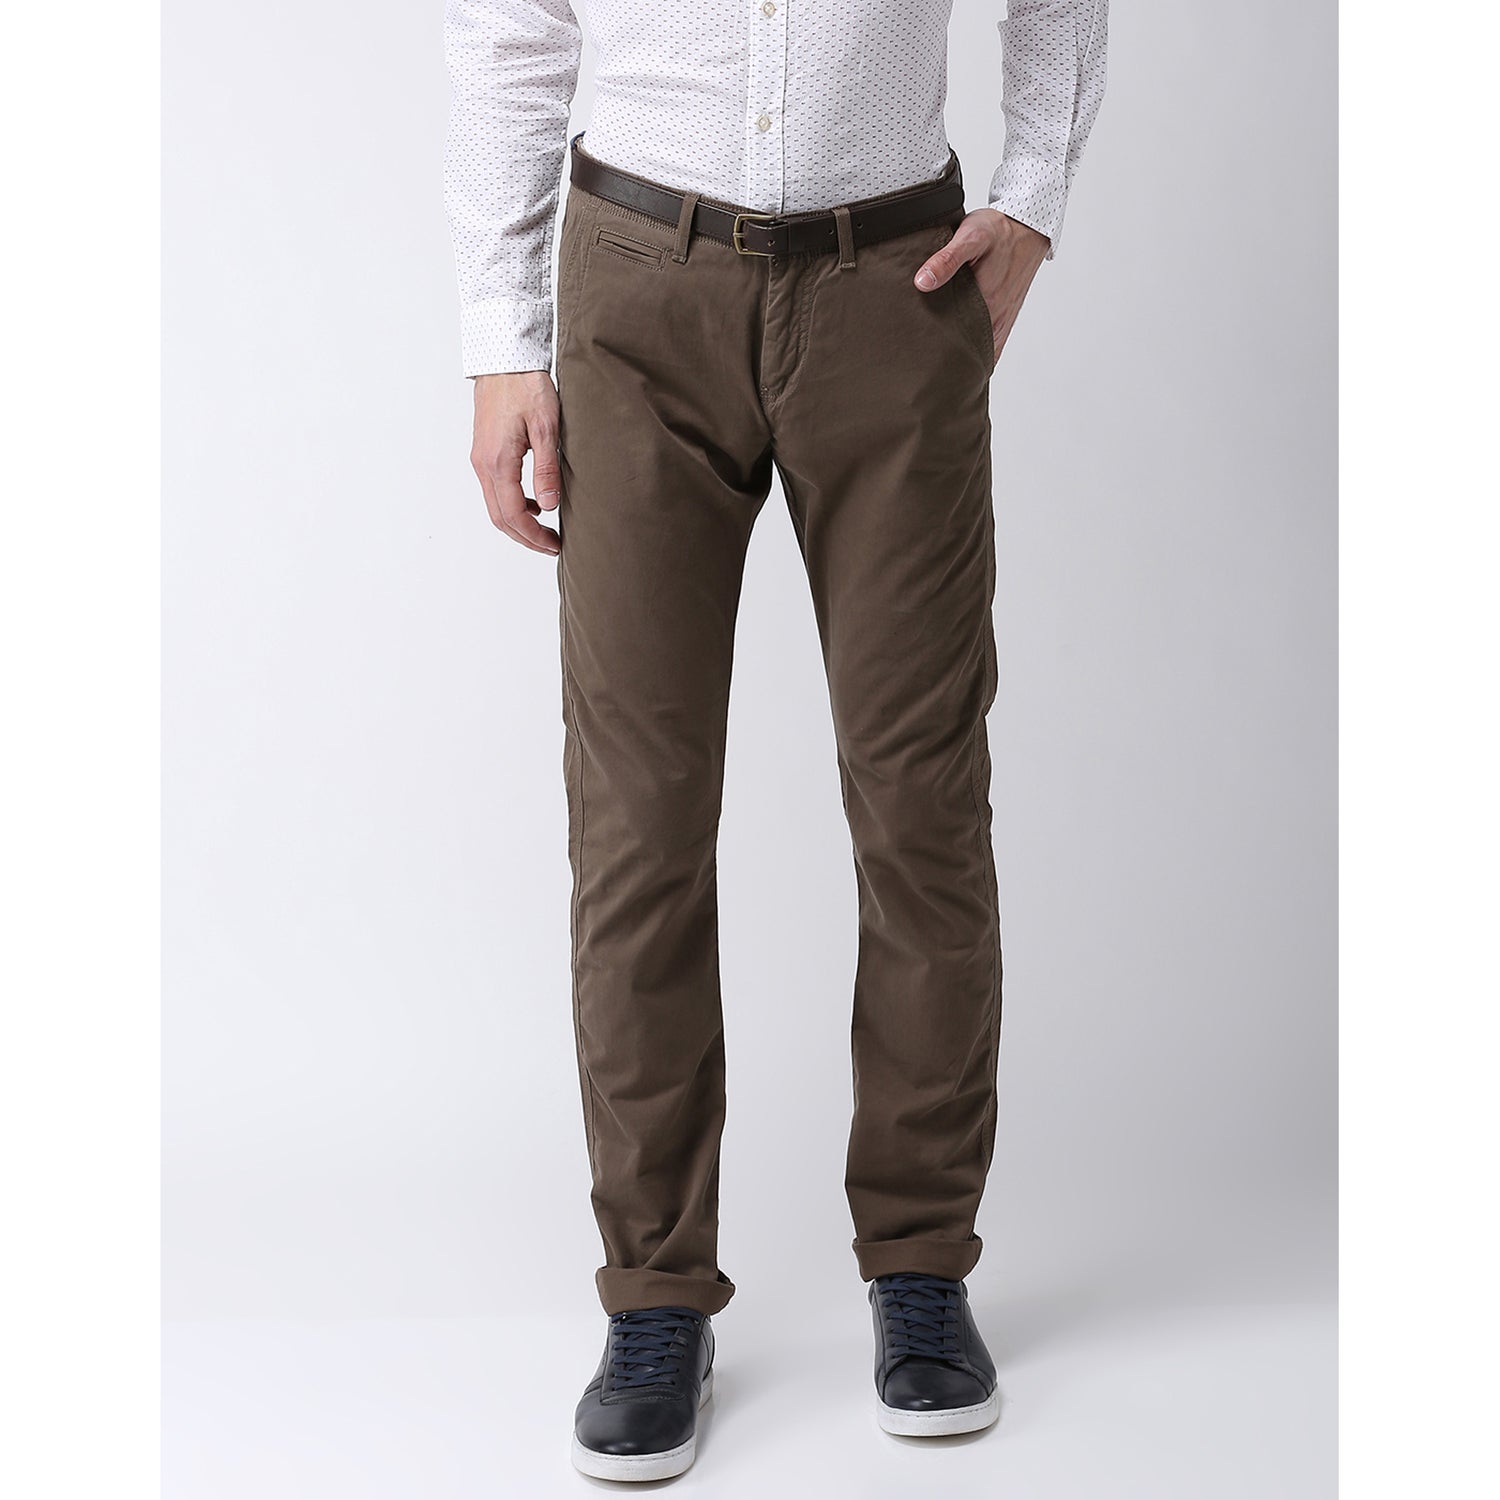 Buy Ketch Alloy Slim Fit Chinos Trouser for Men Online at Rs563  Ketch